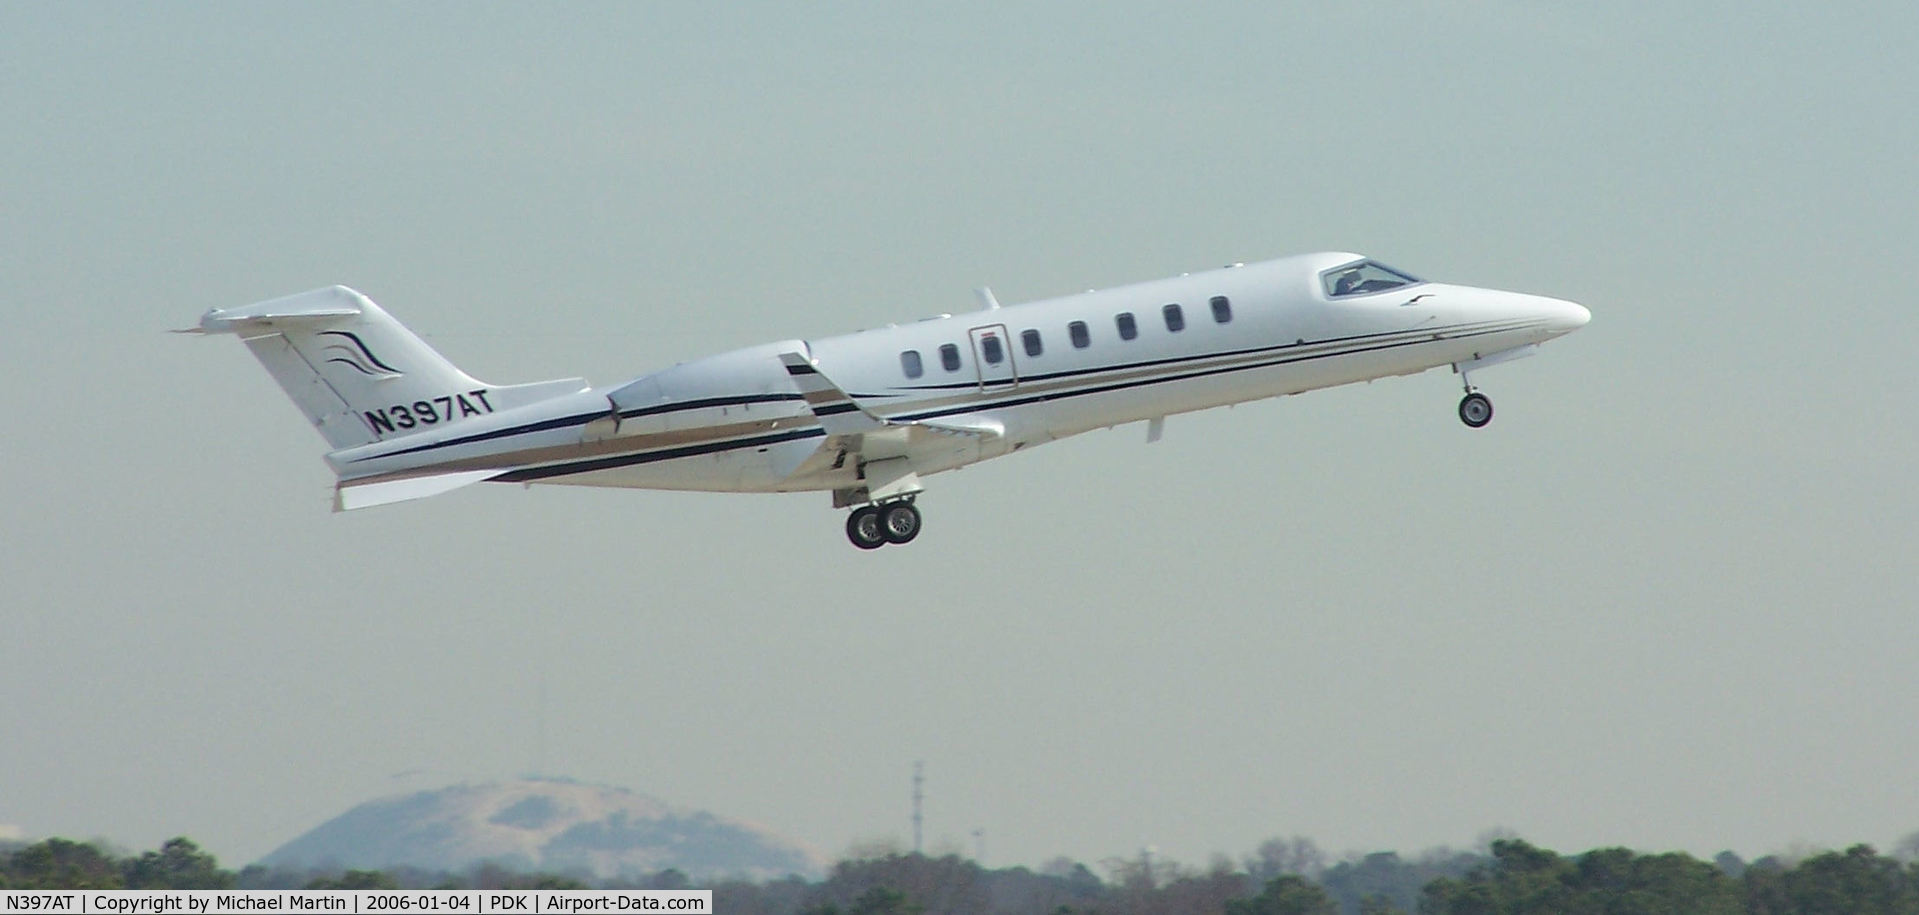 N397AT, 2000 Learjet Inc 45 C/N 105, Takeoff from 20L